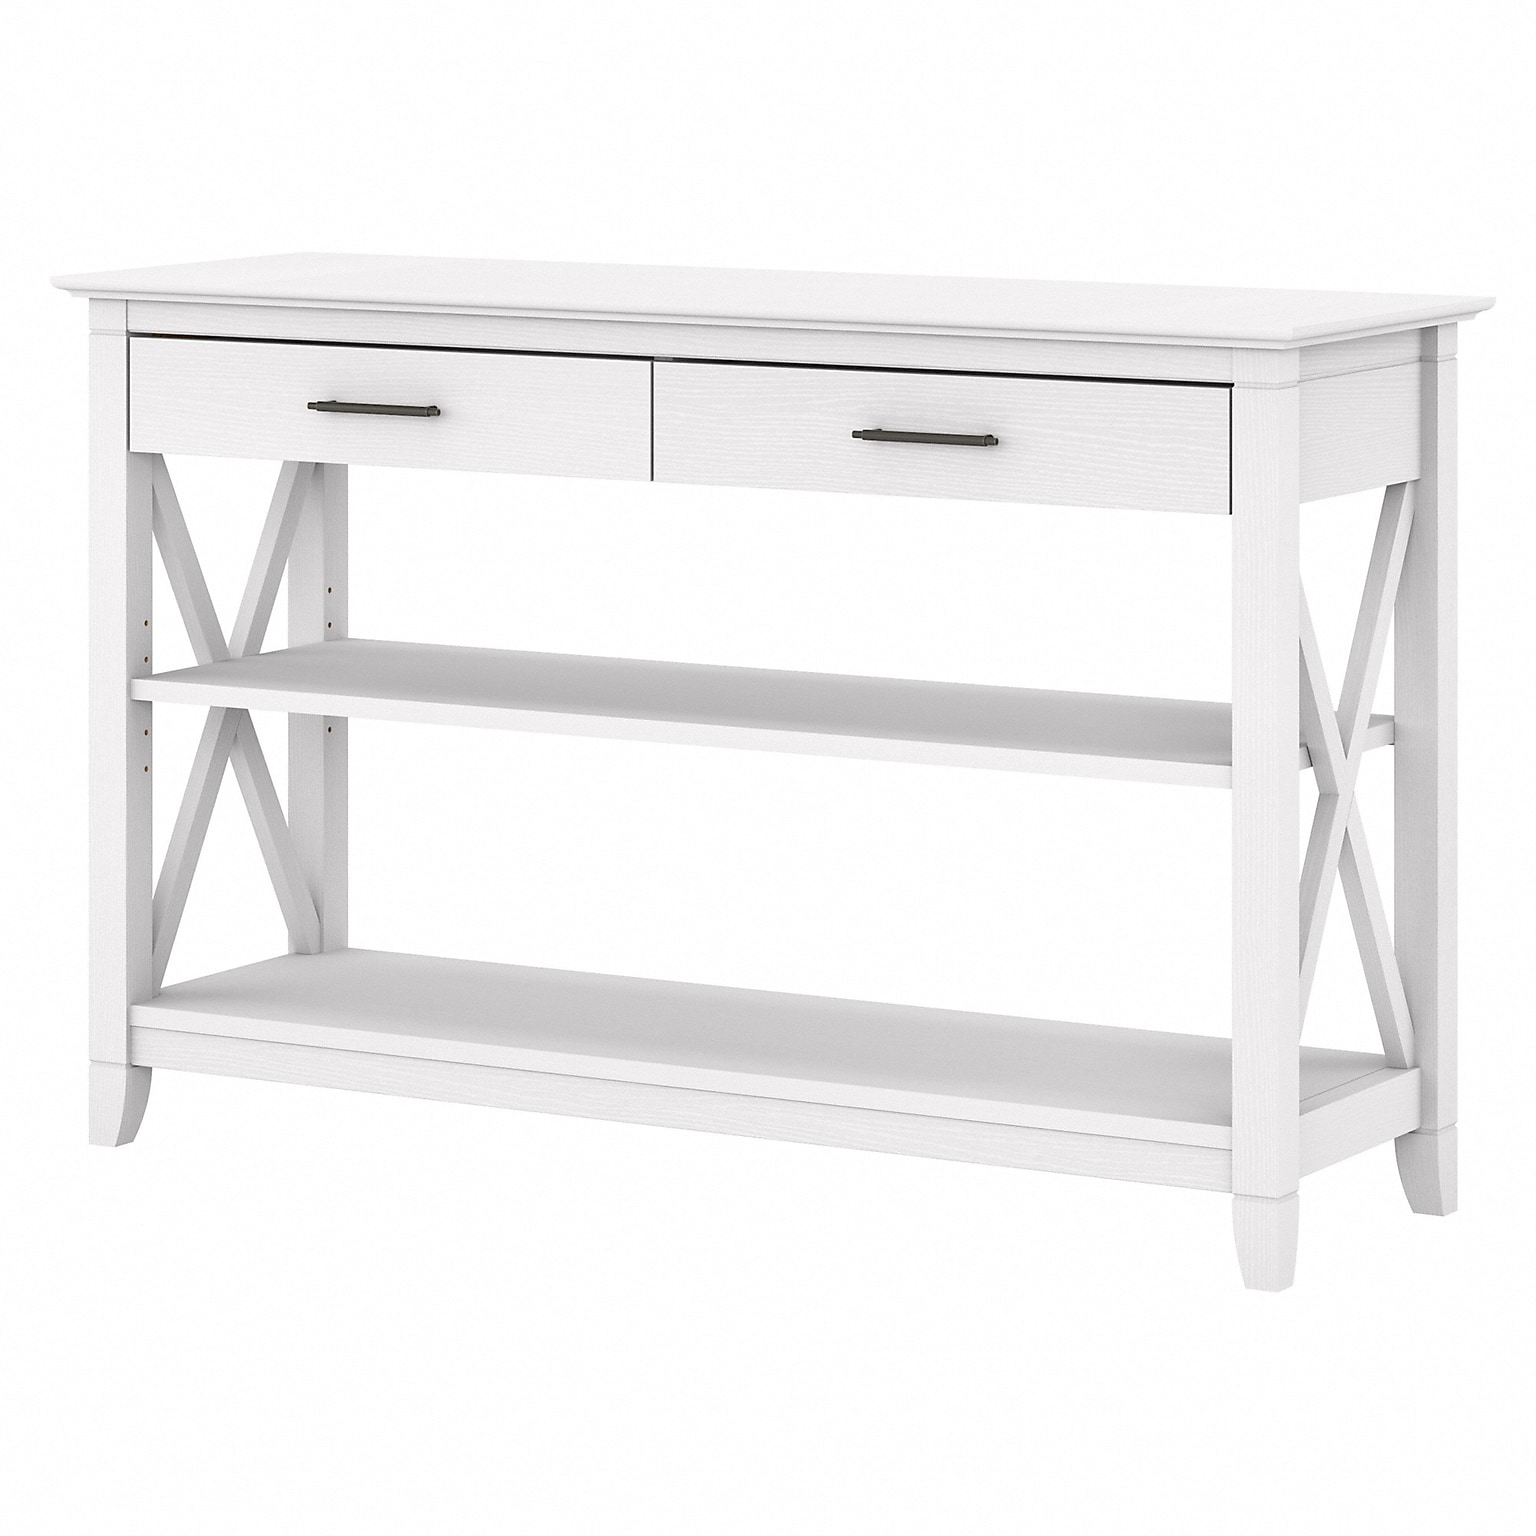 Bush Furniture Key West 47 x 16 Console Table with Drawers and Shelves, Pure White Oak (KWT248WT-03)